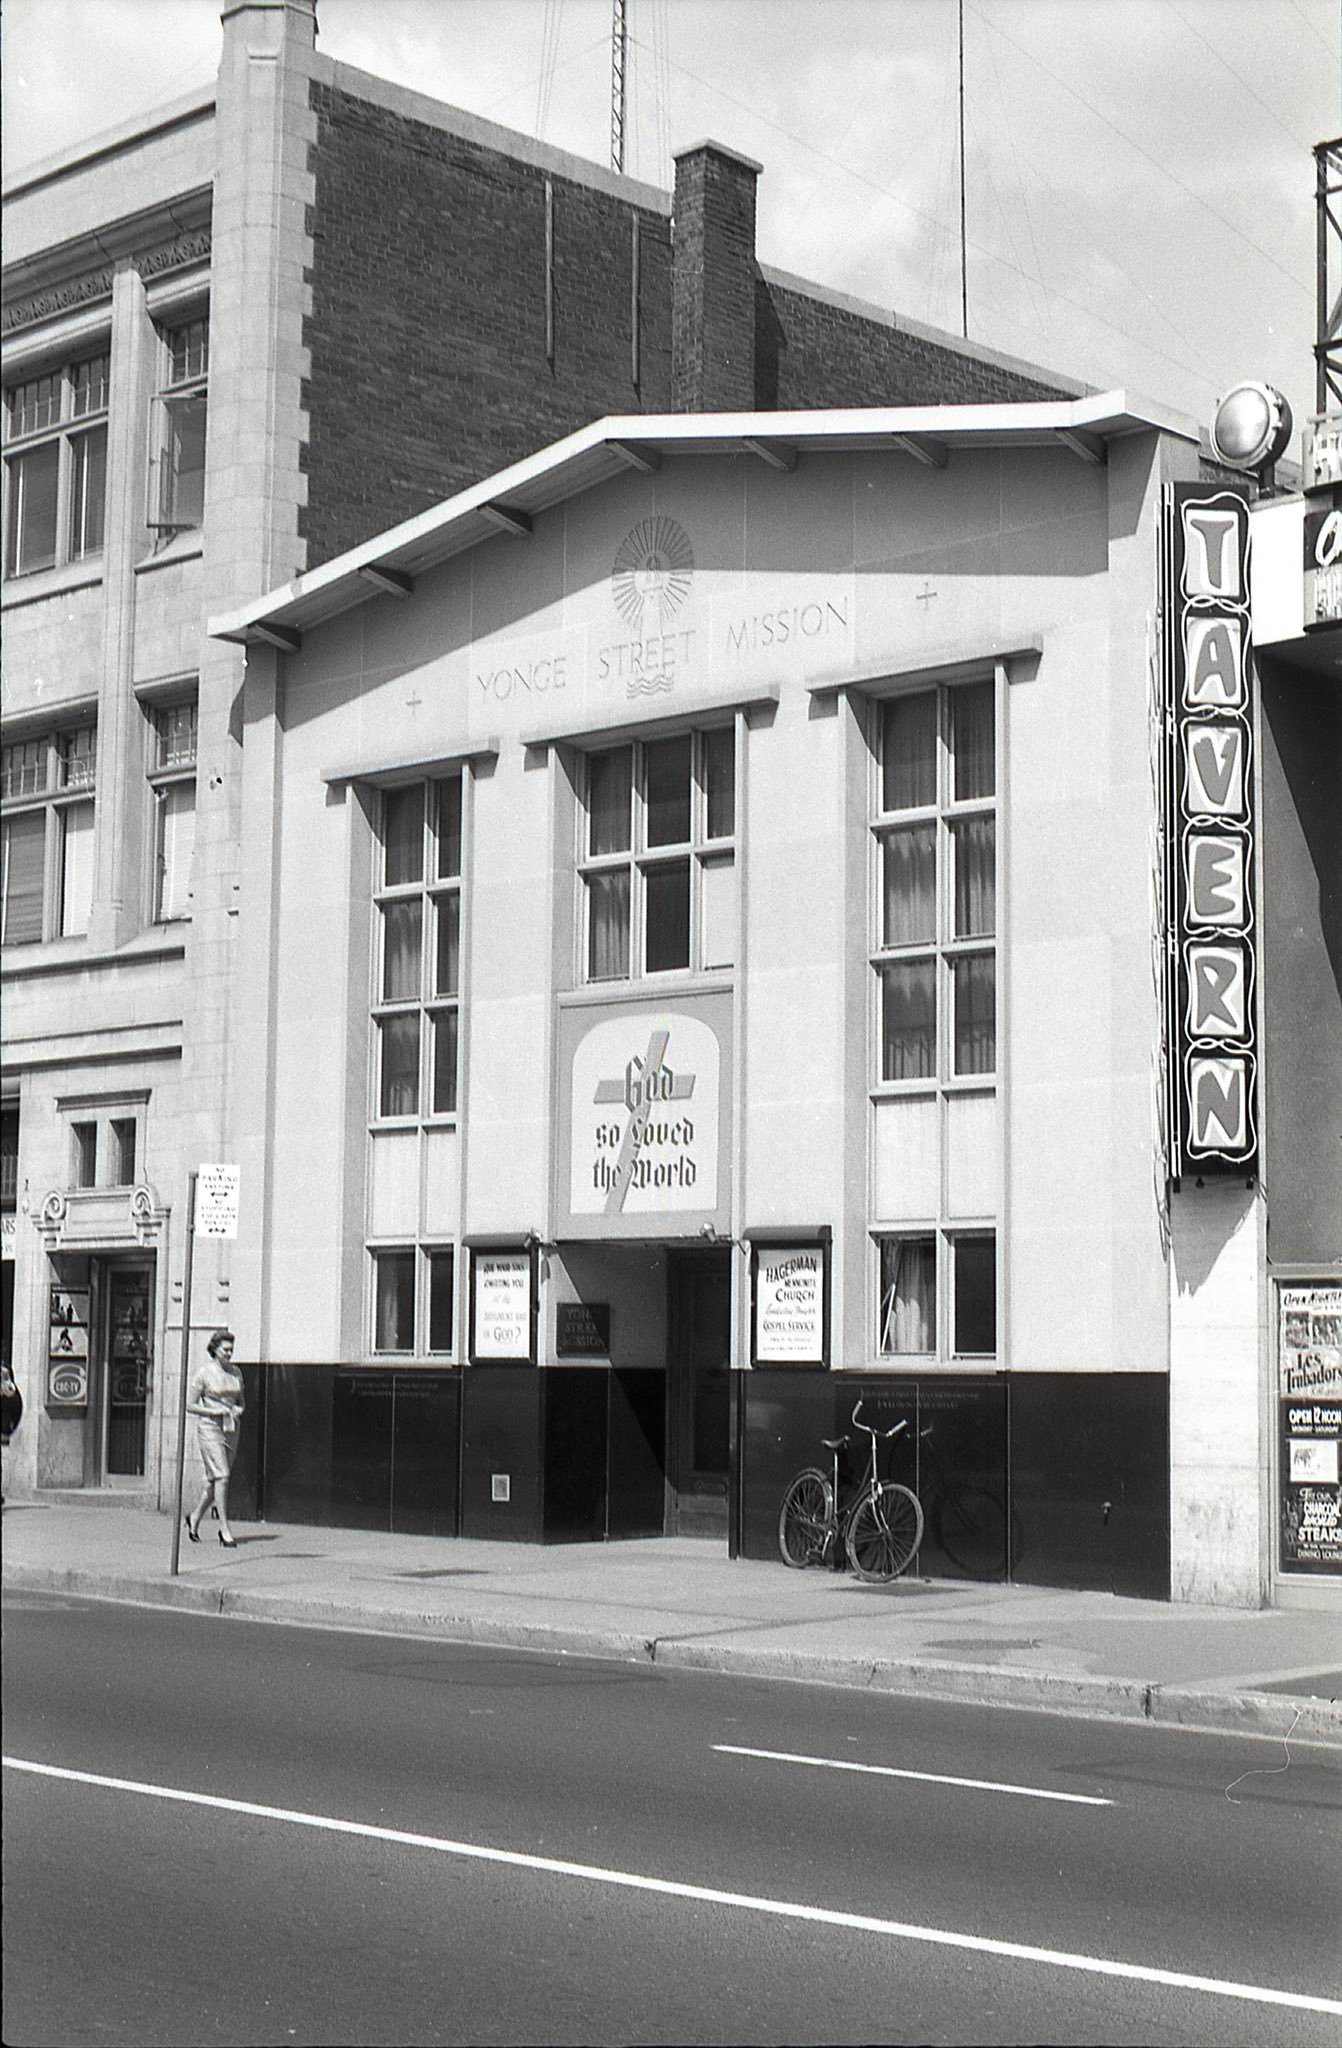 A nice look at 381 Yonge Street as it appeared in 1962.